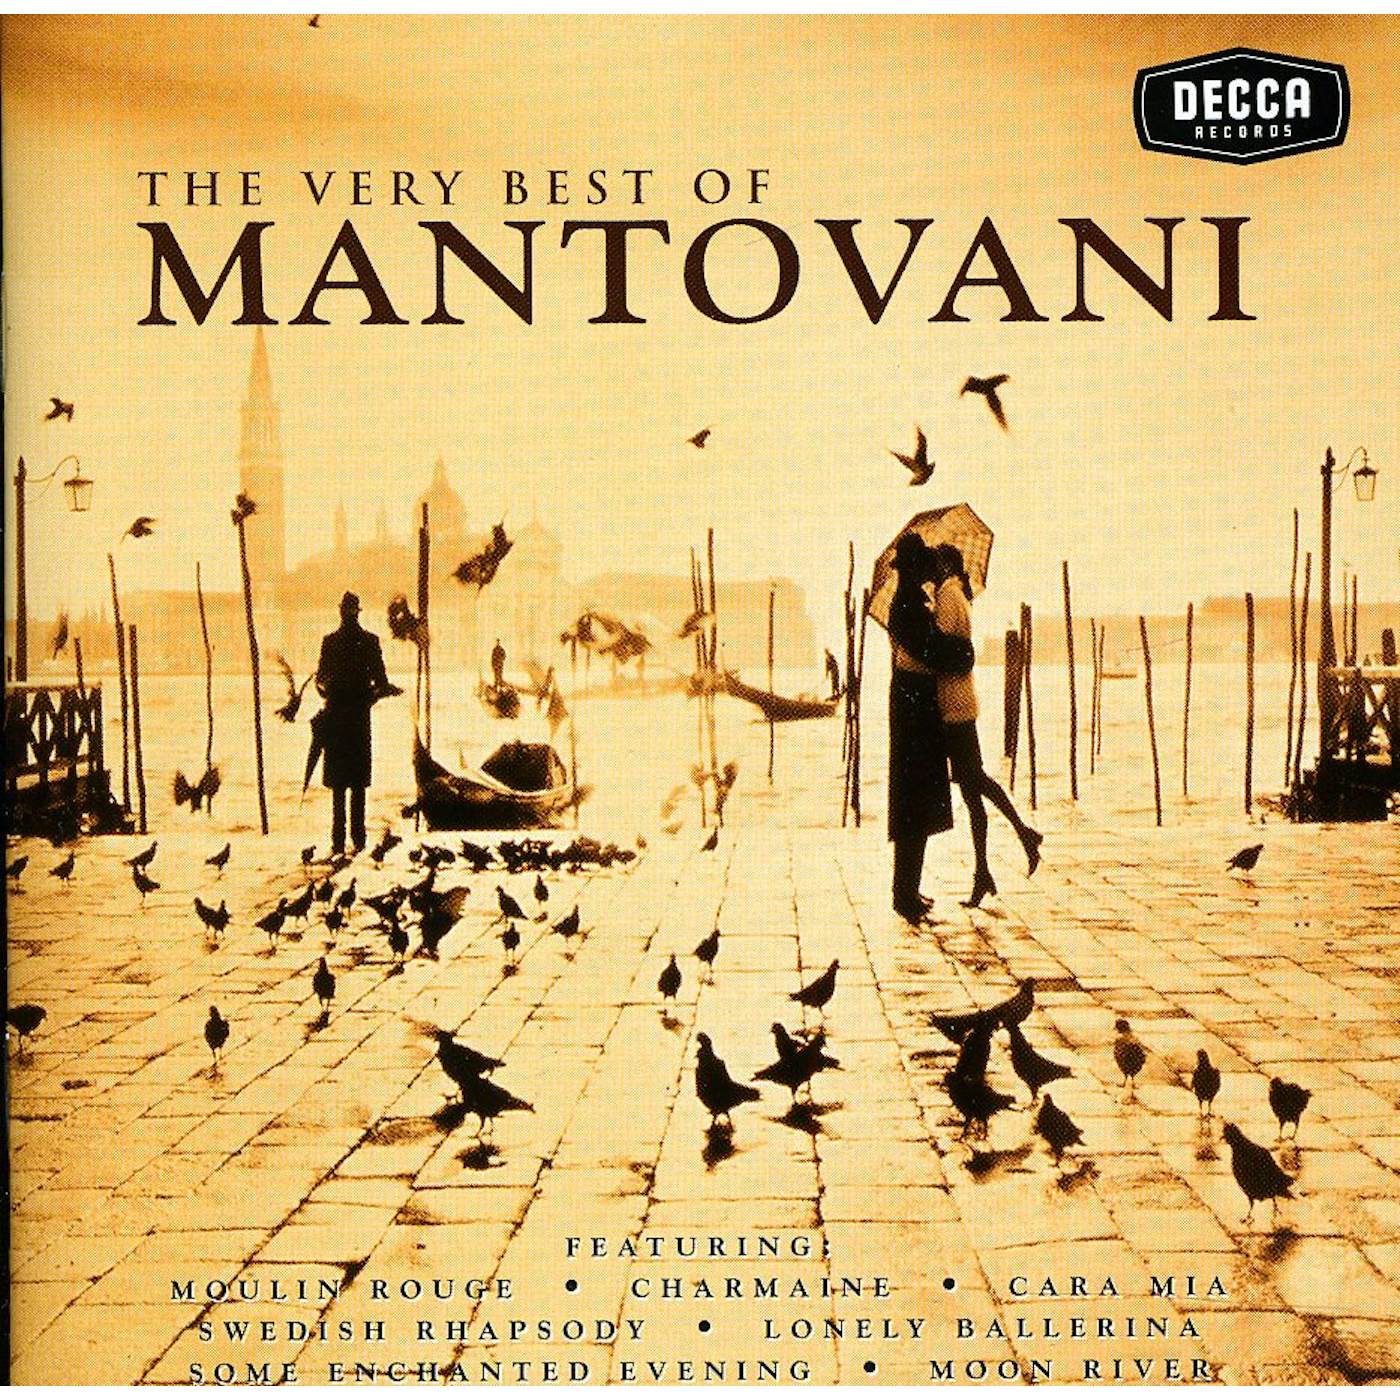 Mantovani & His Orchestra VERY BEST OF CD